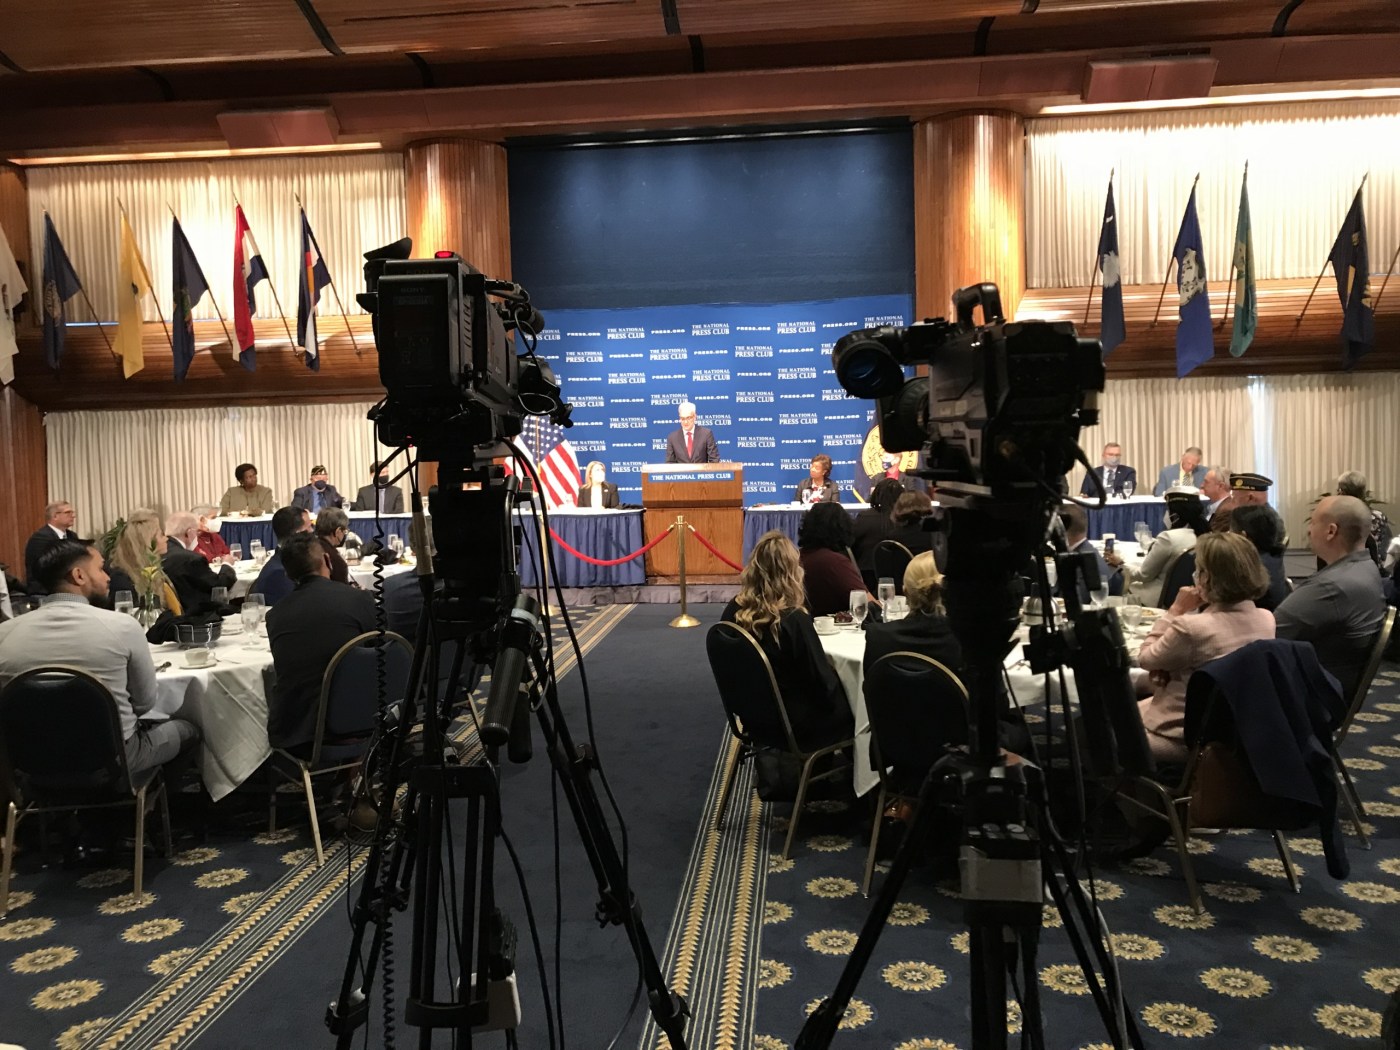 Veterans Day should be a call to action for all Americans to serve those who have served, VA Secretary Denis McDonough said Nov. 9 during a National Press Club event in Washington, D.C.